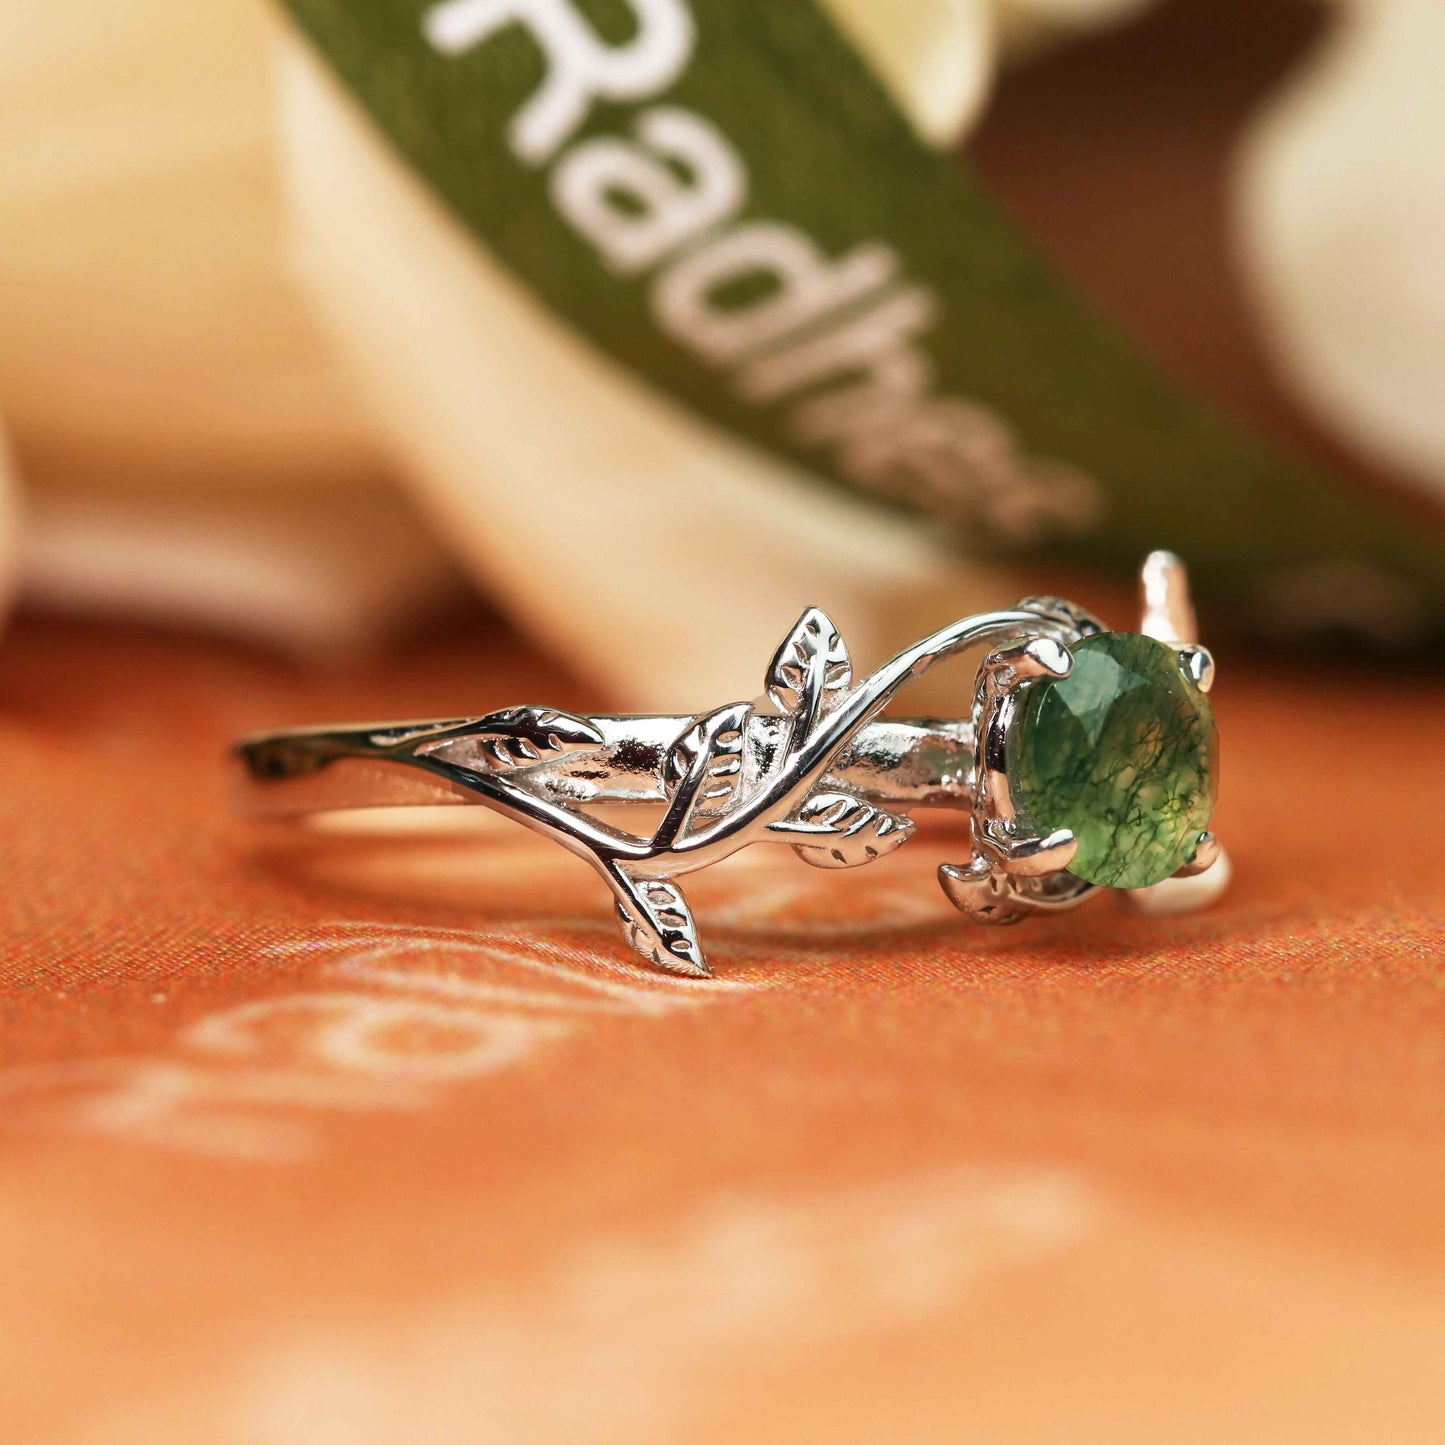 Dainty Vine 1 carat Round Shaped Moss Green Agate Solitaire Ring in White Gold